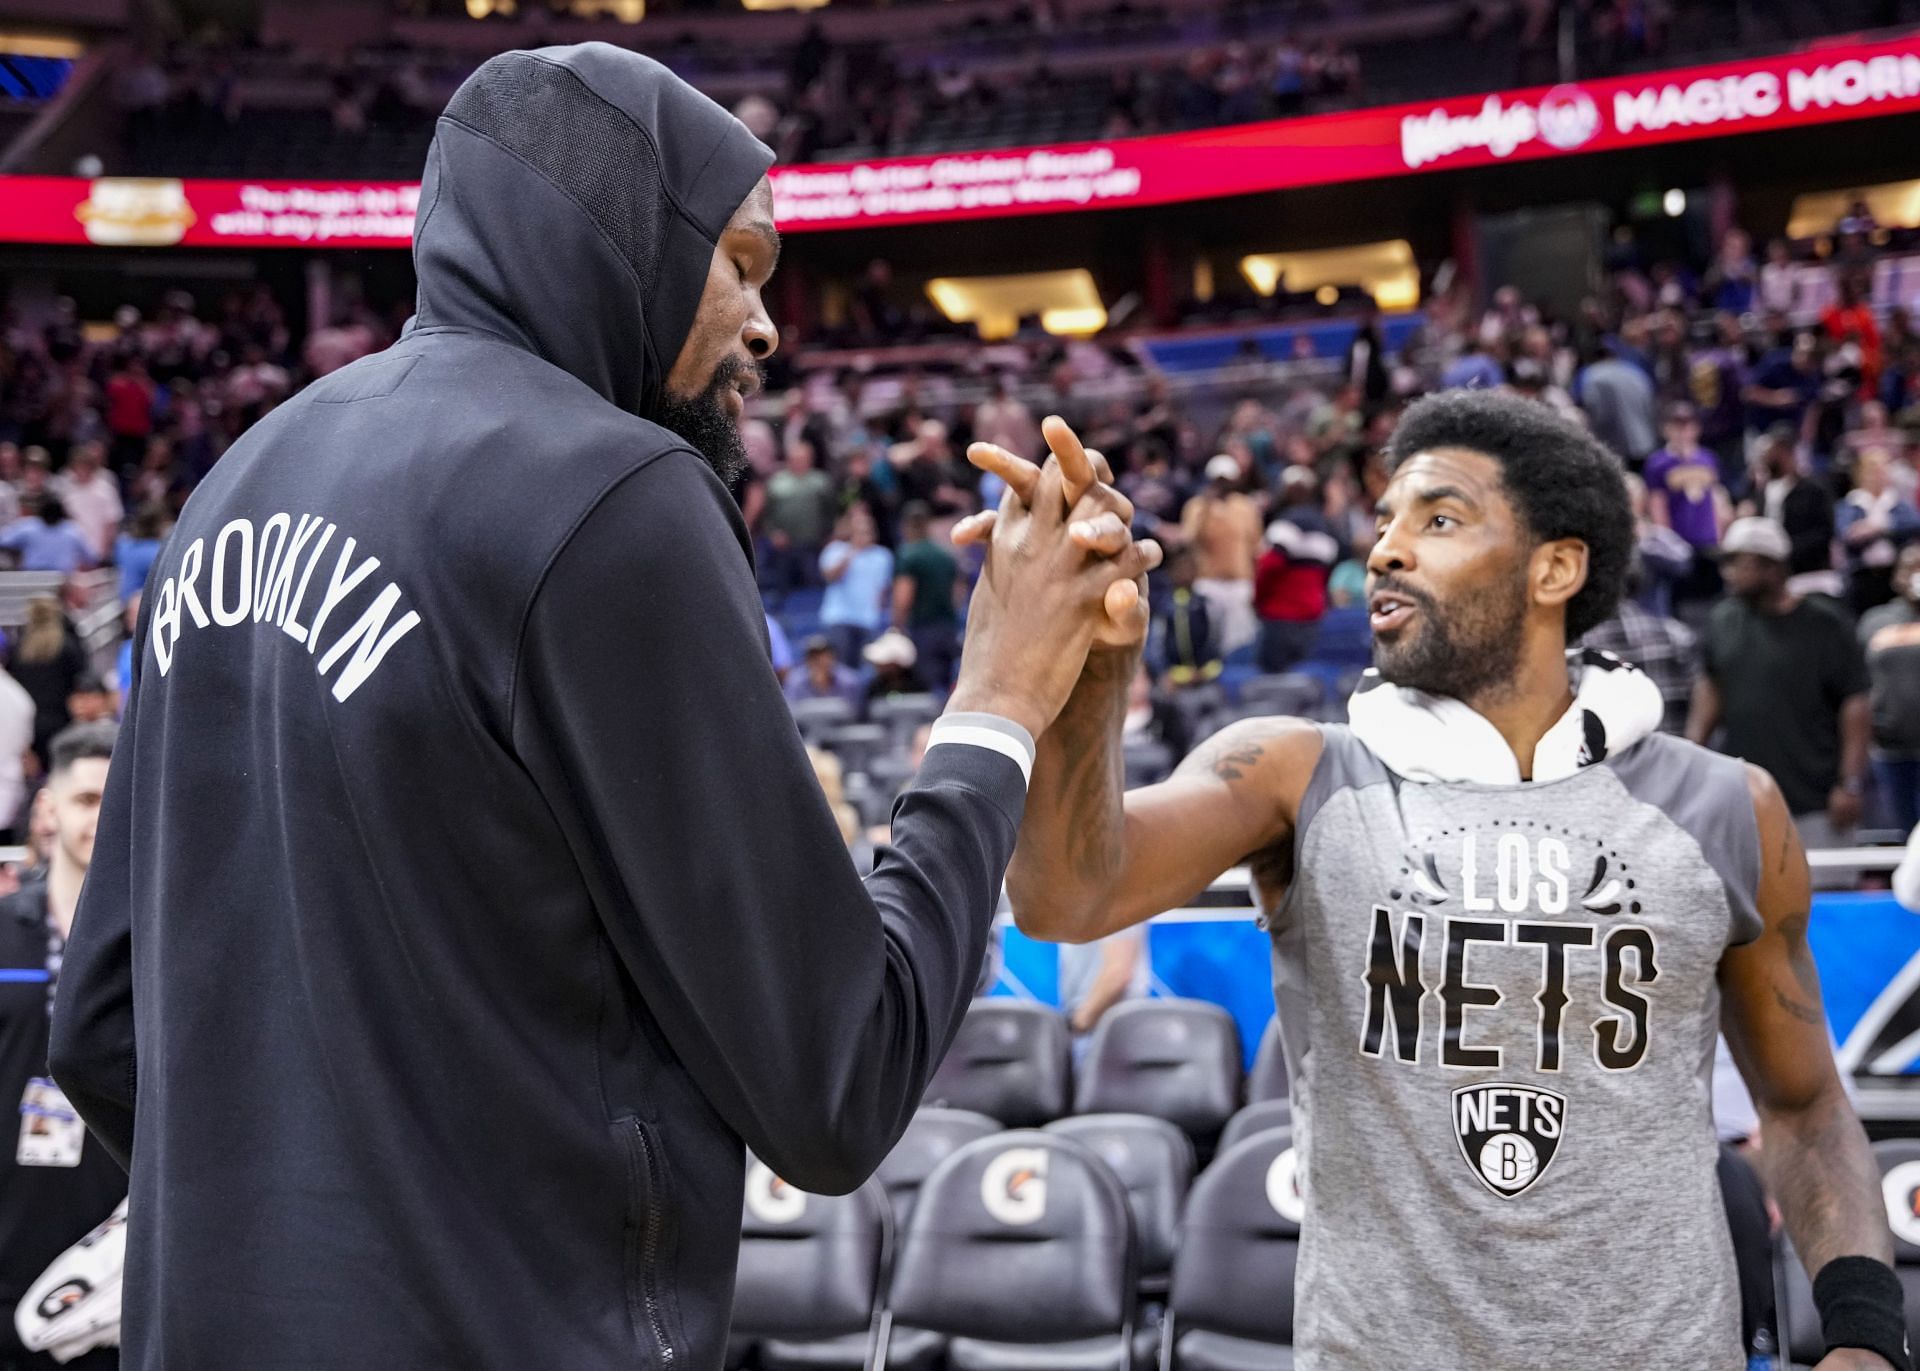 Kevin Durant and Kyrie Irving have scored 50-plus points in consecutive games for the Brooklyn Nets